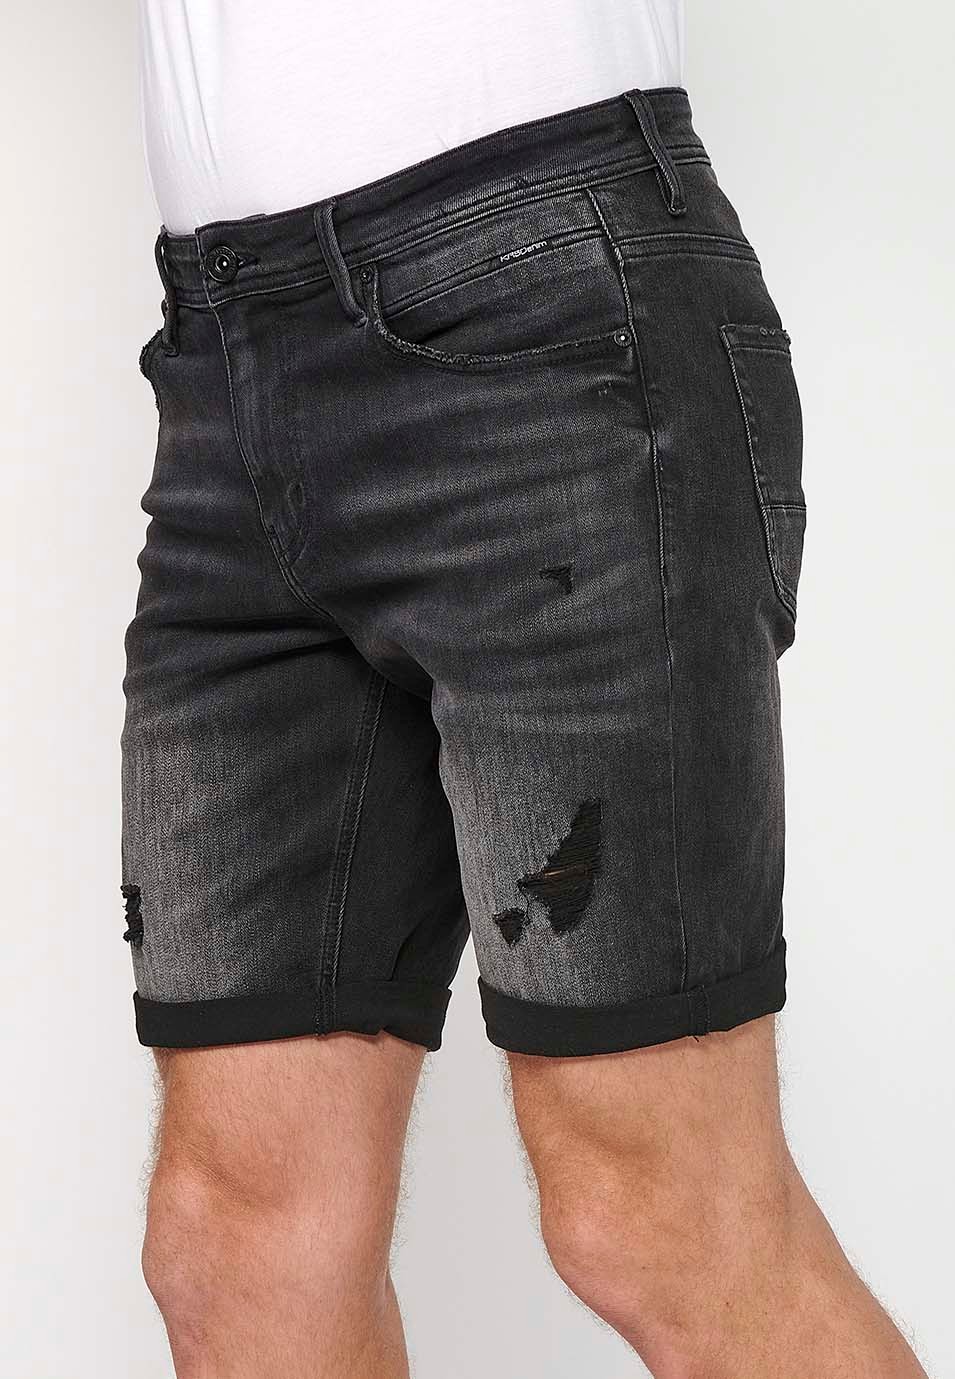 Black Denim Bermuda Shorts with Turn-Up Finish and Front Zipper and Button Closure for Men 5